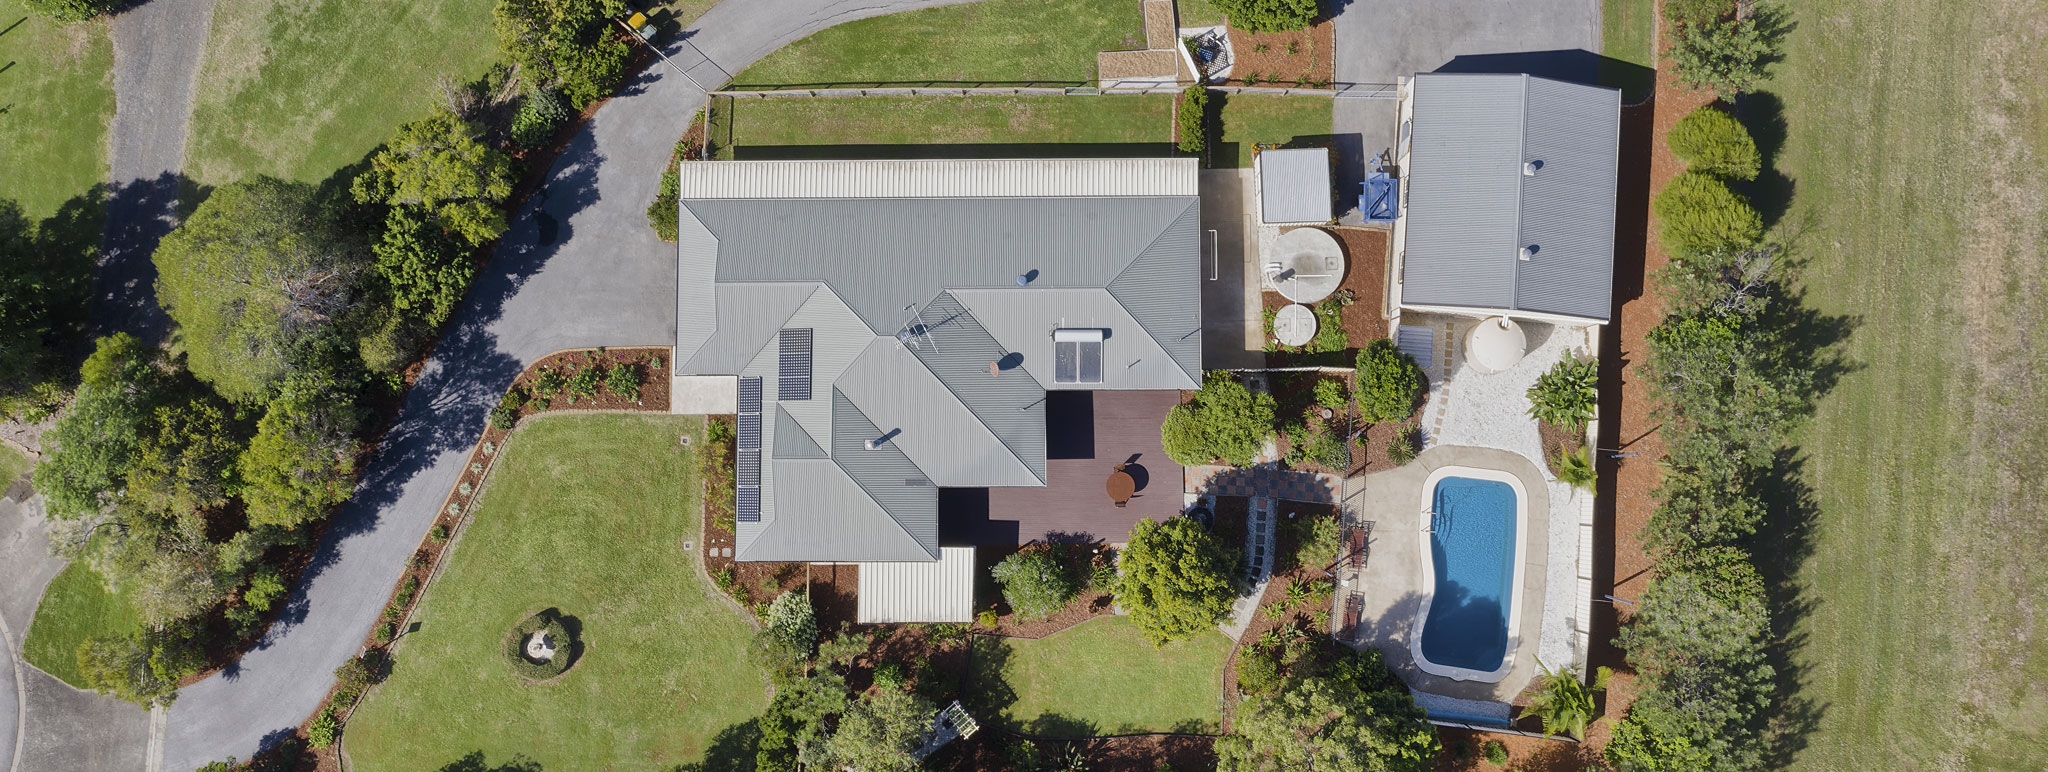 Drones photography for selling real estate listings